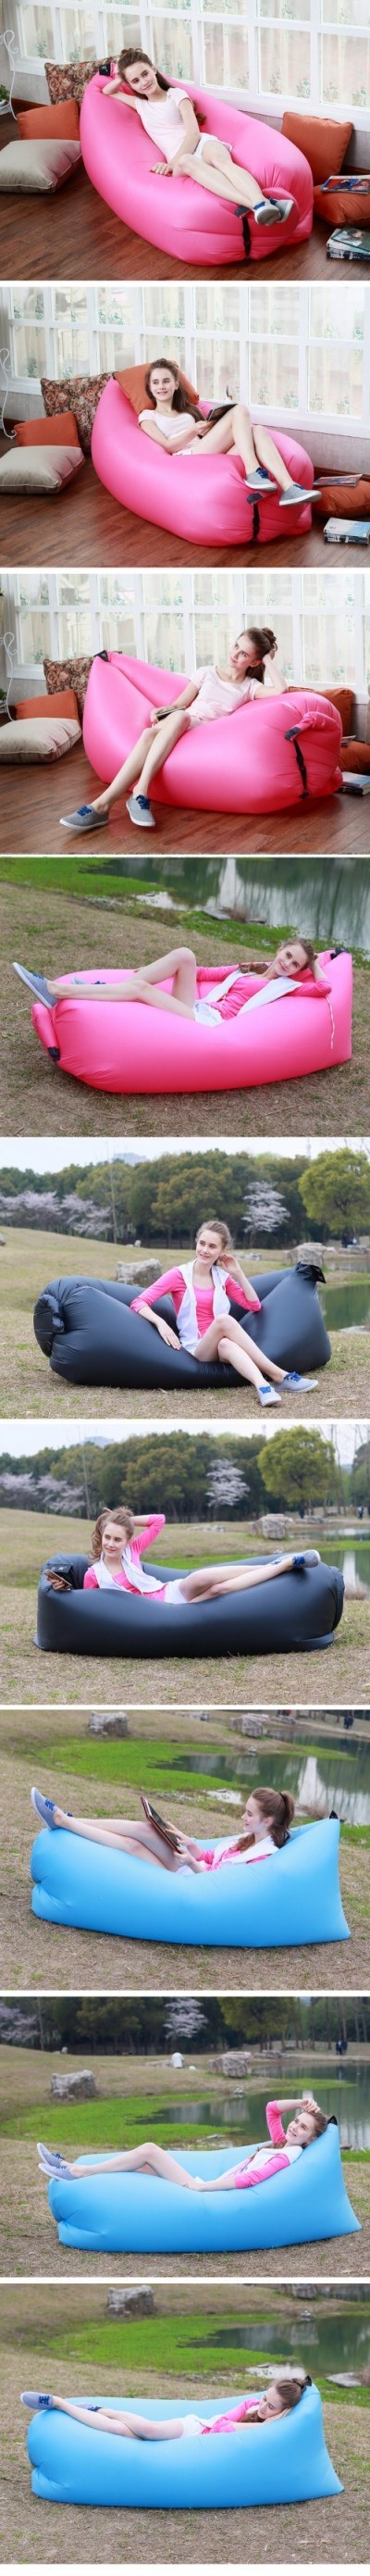 Finego Air Camping Outdoor Inflatable Portable Multifunctional Travel Bed Lounge Sofa